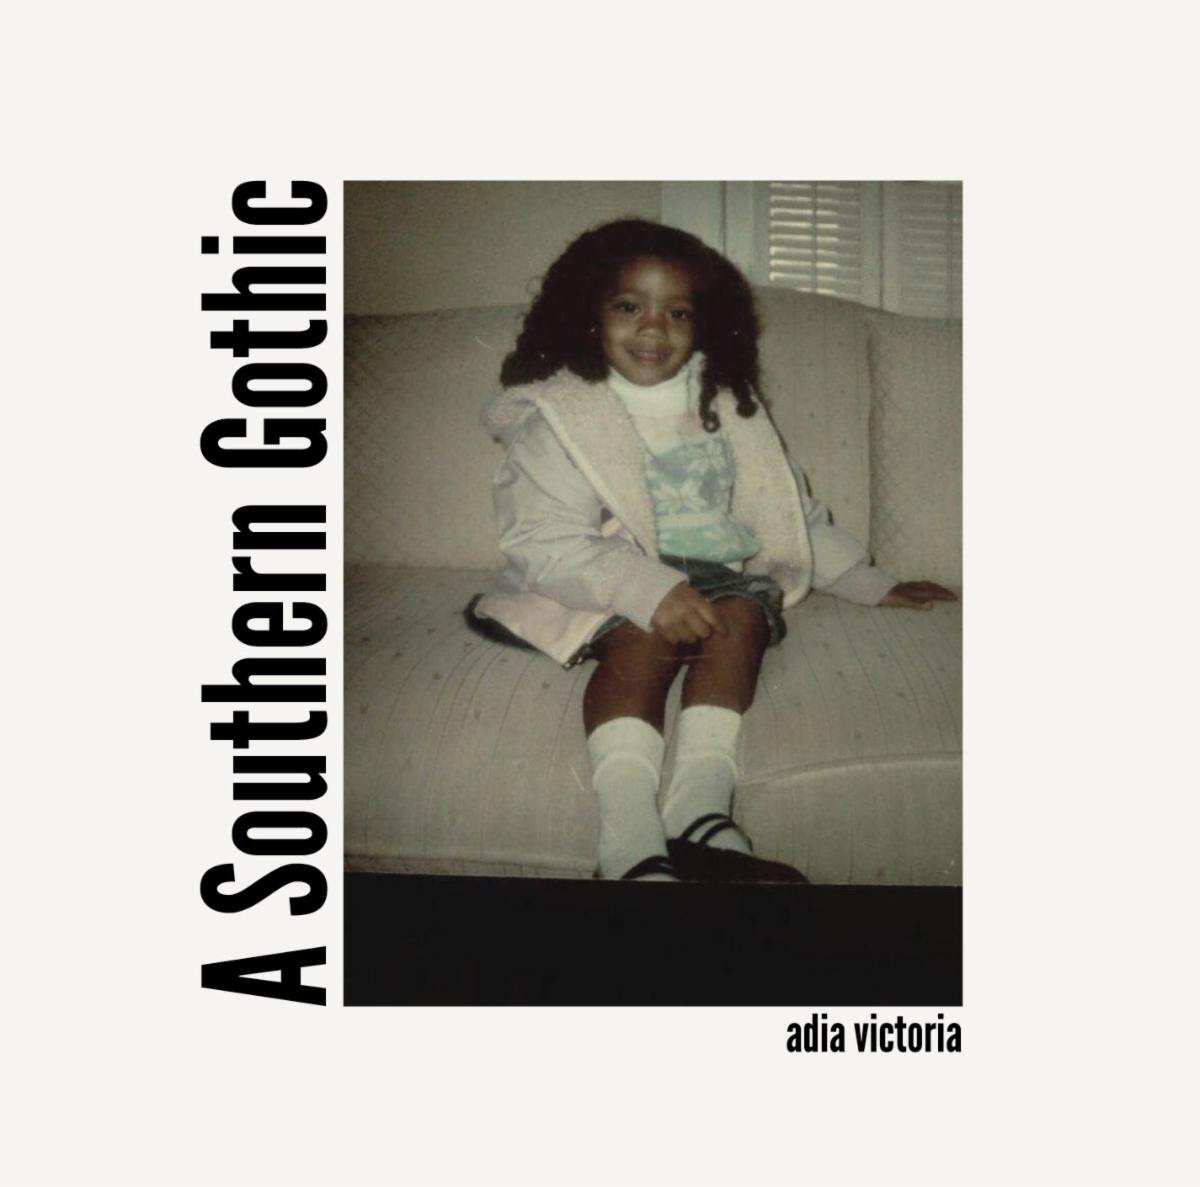 Adia Victoria: A Southern Gothic [Album Review]